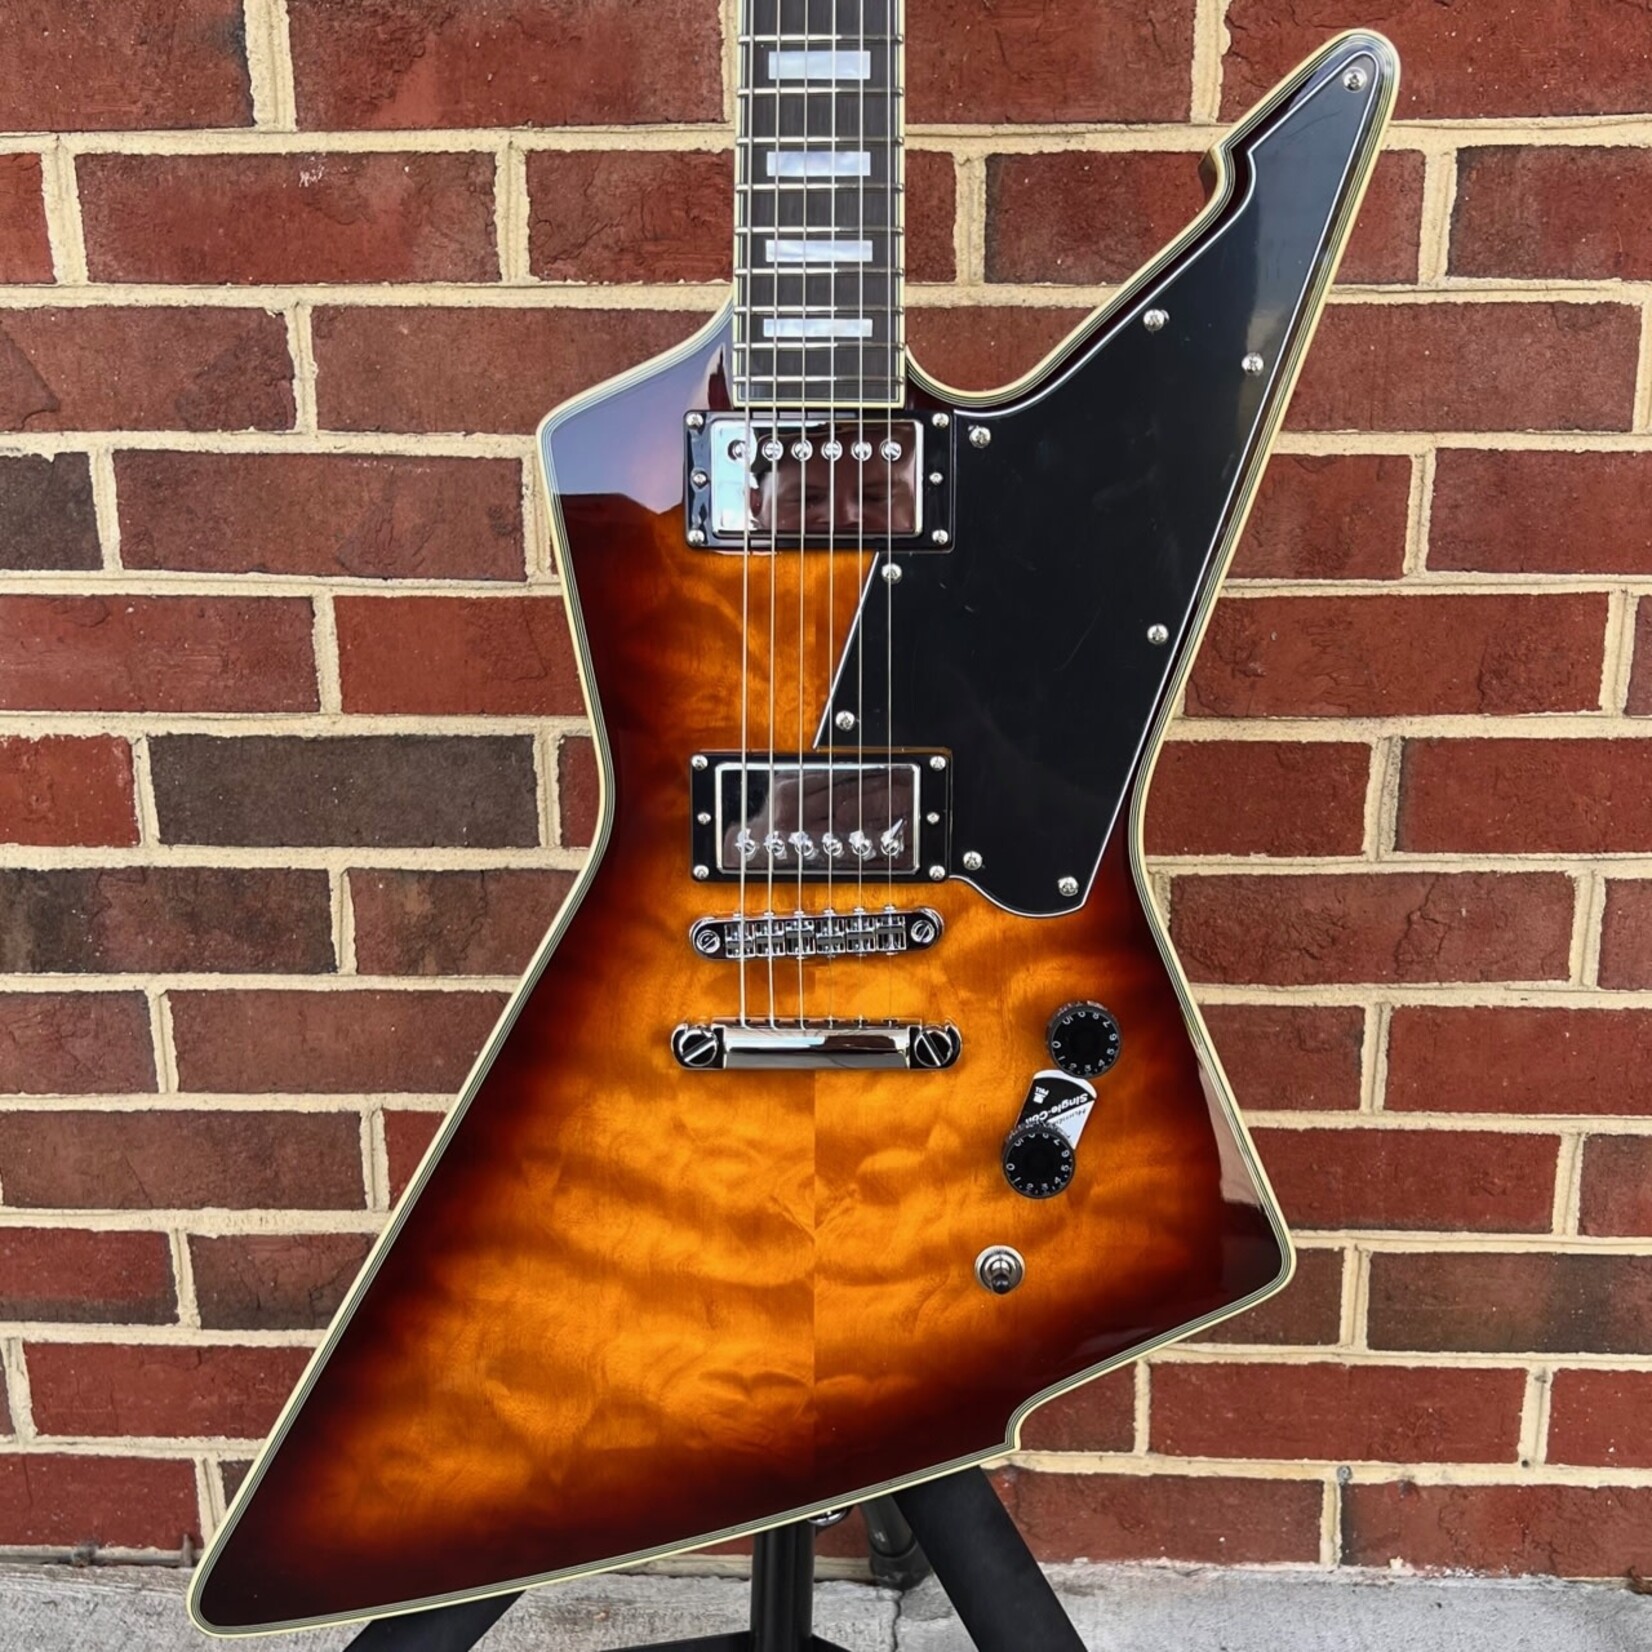 Schecter Guitar Research Schecter E-1 Custom, Vintage Sunburst, Quilted Maple Top, Ebony Fretboard, Locking Tuners, Schecter USA Sunset Strip/Pasadena Pickups, SN# W23051947